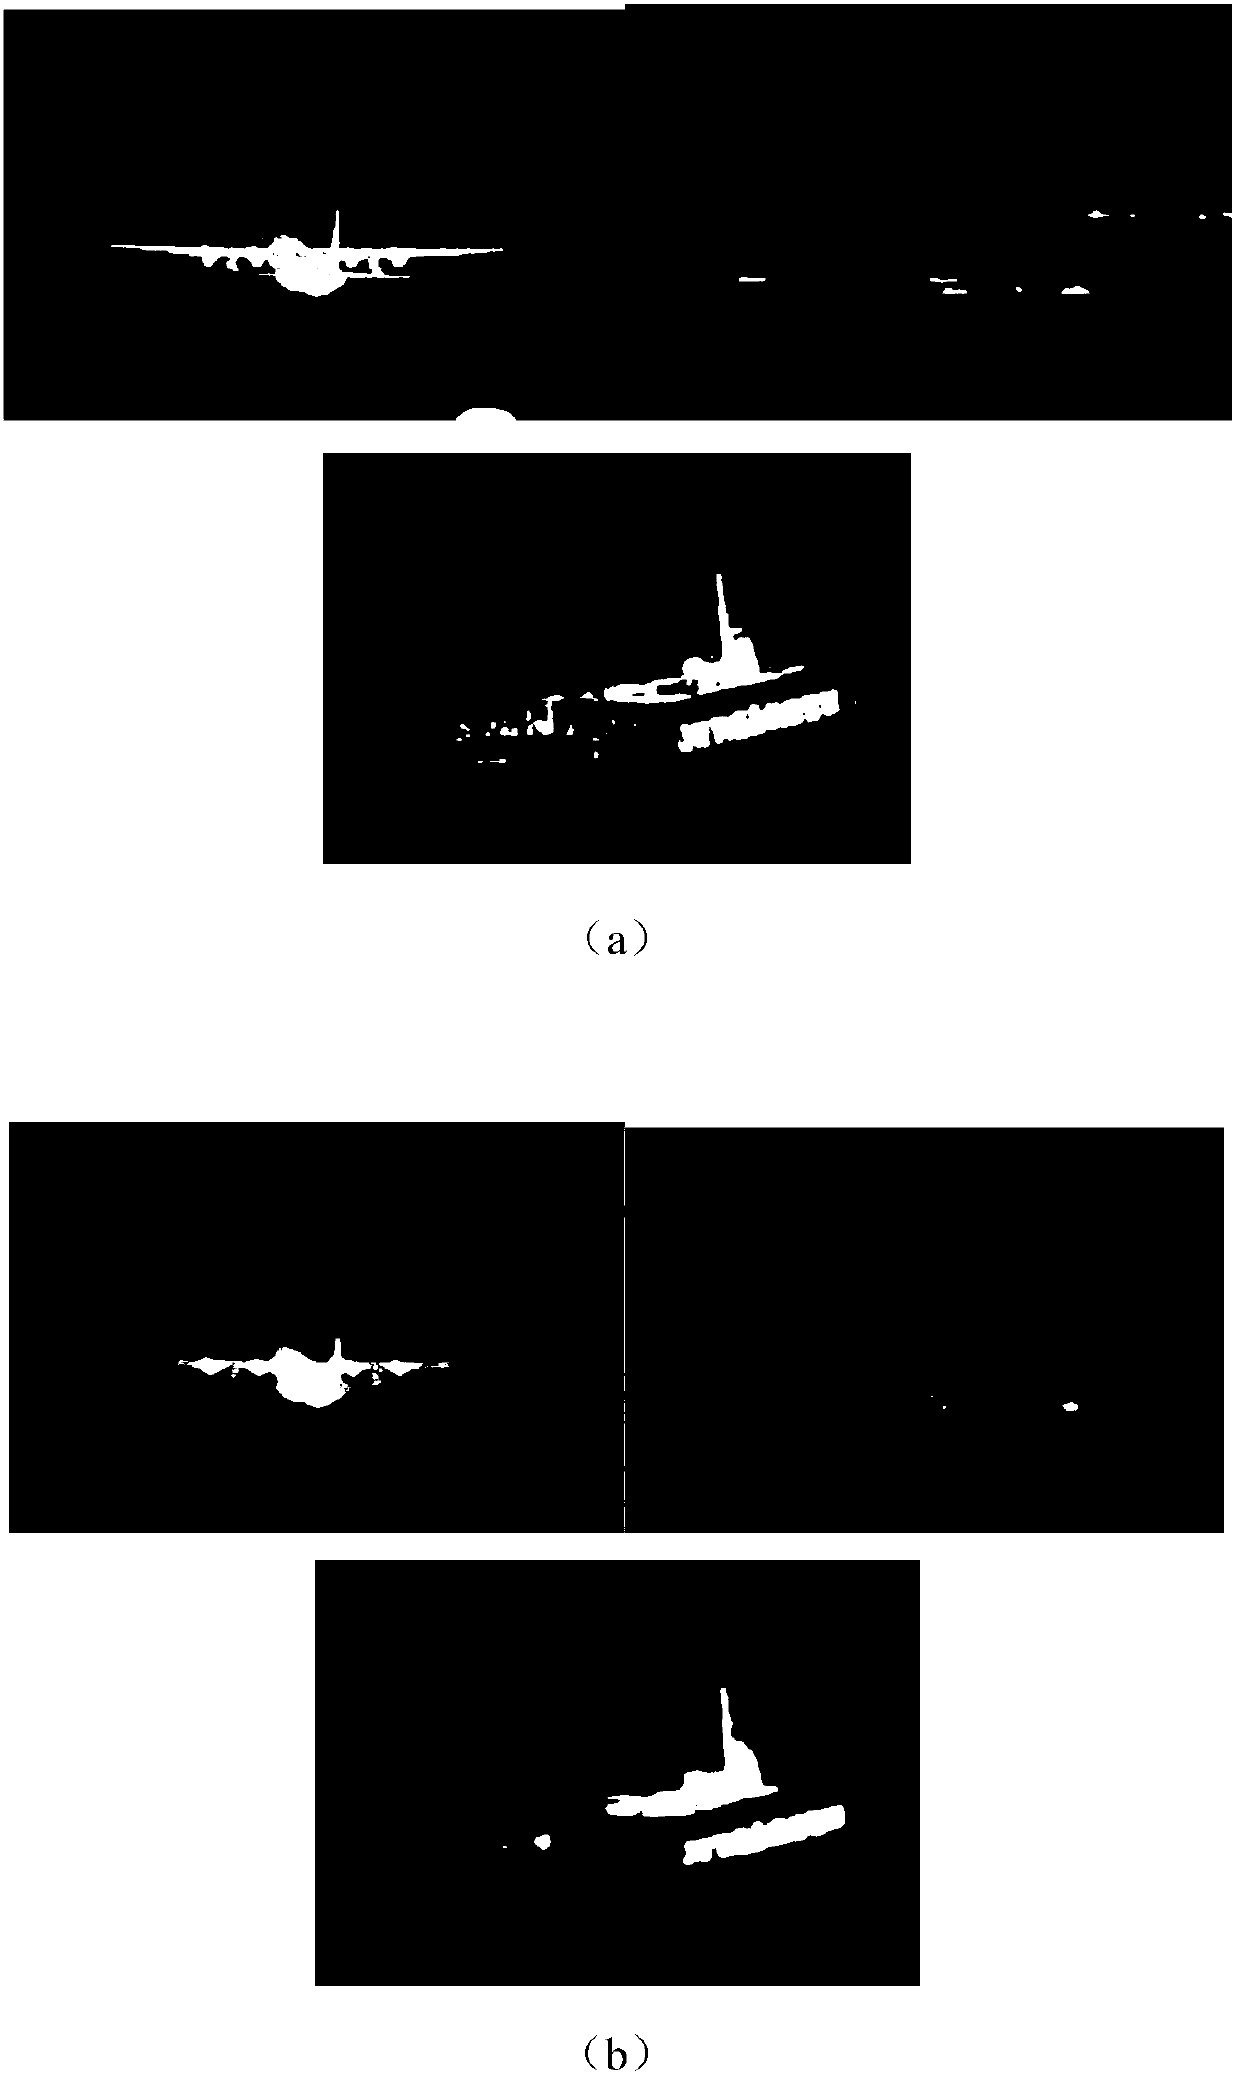 Marine infrared target detection method based on visual attention mechanism